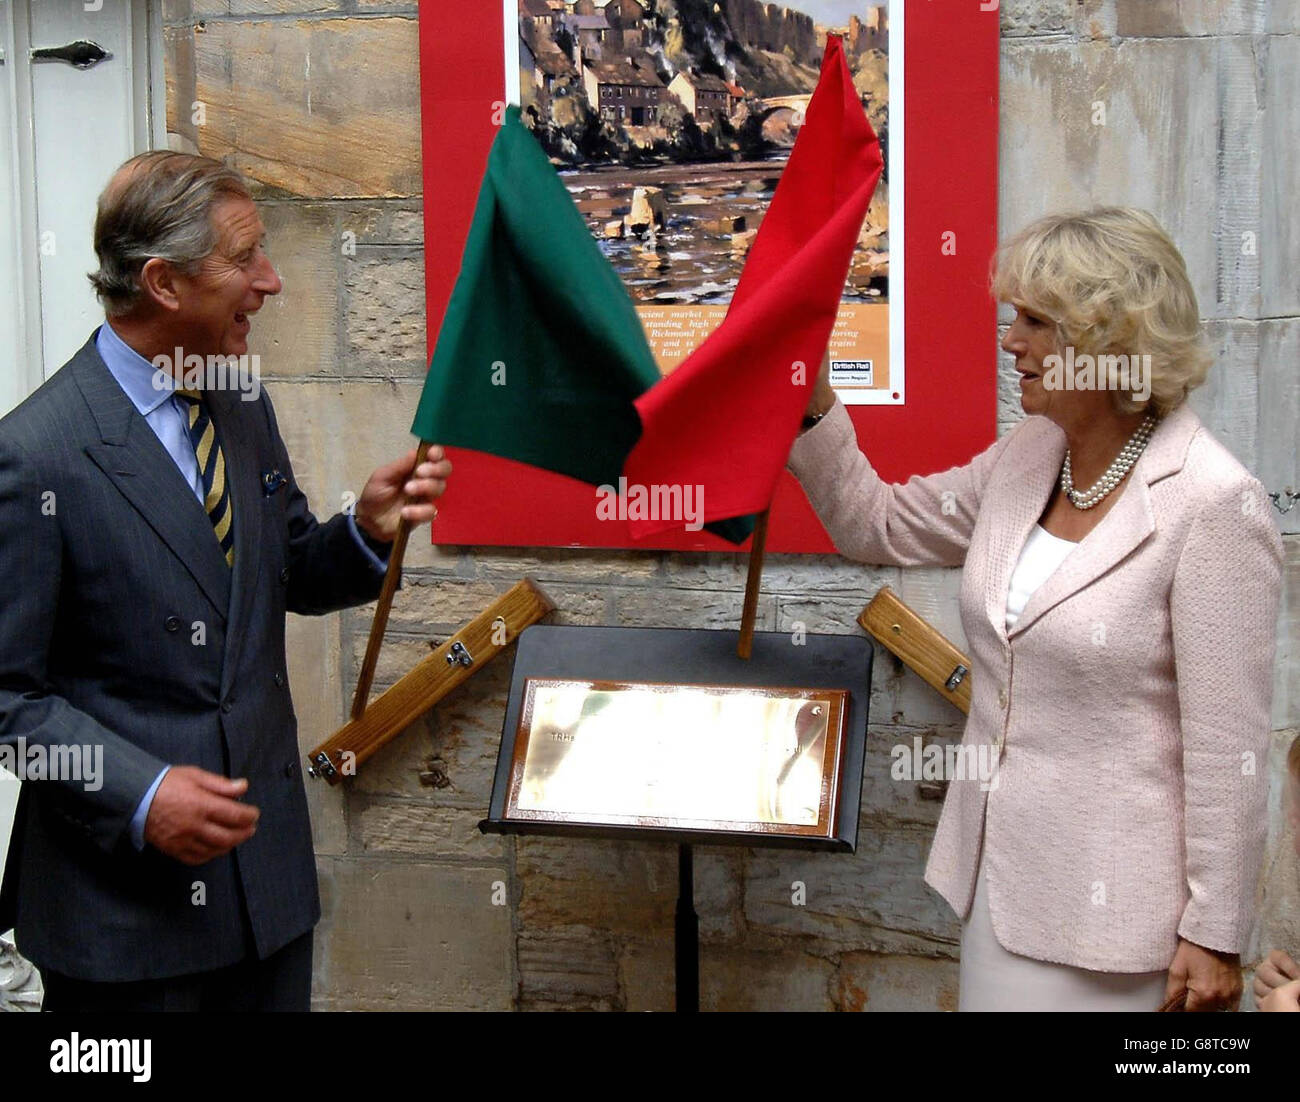 The Prince of Wales and the Duchess of Cornwall wave flags after unveiling a plaque at the old railway station in Richmond, North Yorkshire, Wednesday September 14, 2005. The Royal couple had several engagements in the town today to mark its 850th anniversary of being granted its Royal Charter. See PA story ROYAL Charles. PRESS ASSOCIATION photo. Photo credit should read: John Giles/PA/WPA Rota. Stock Photo